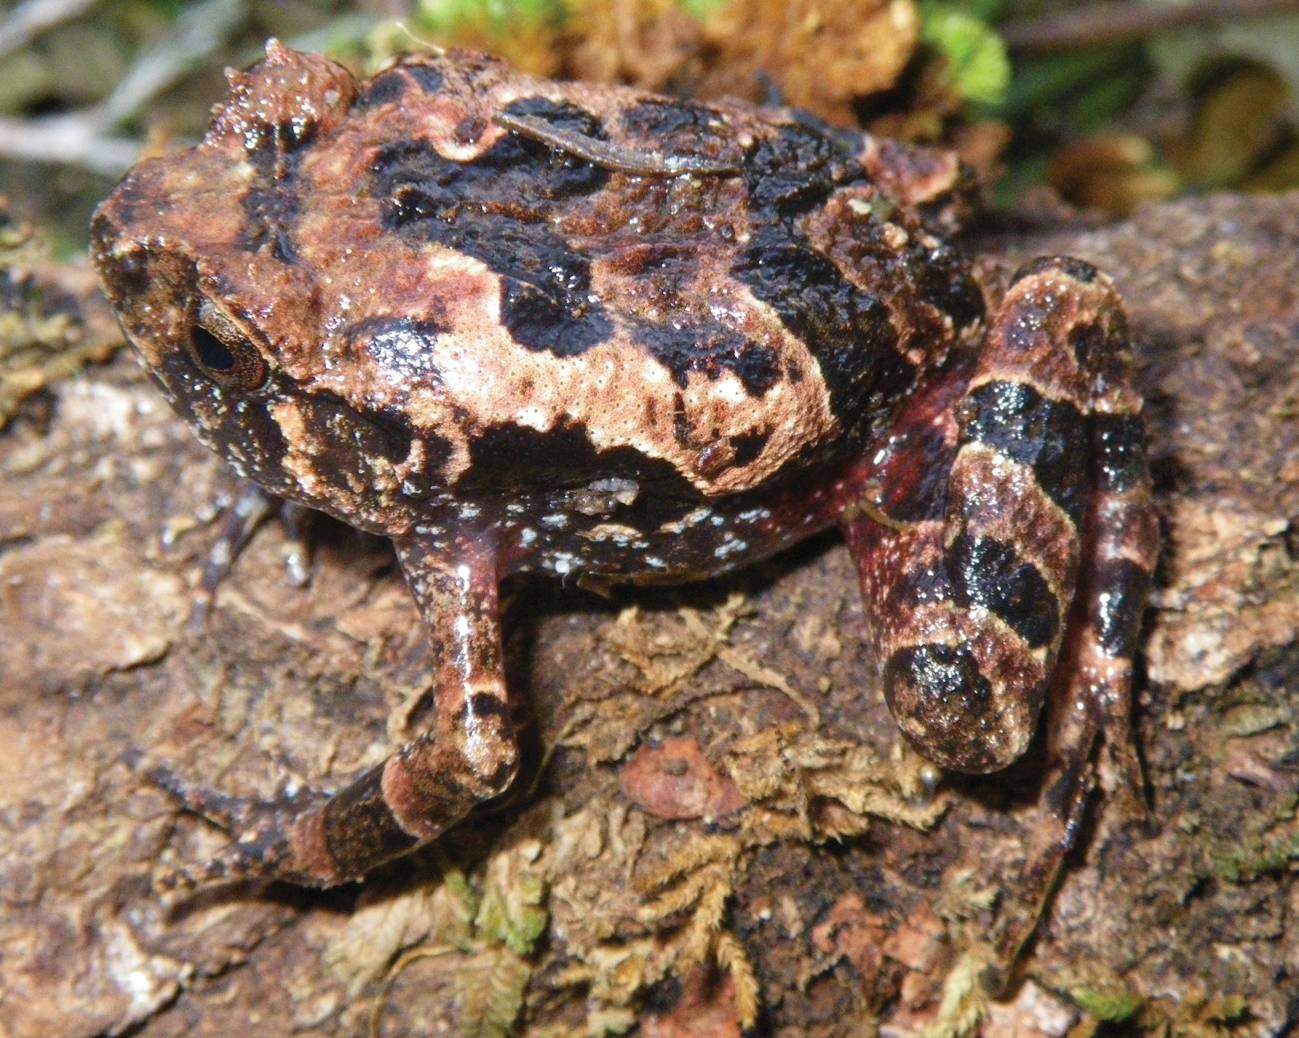 Two new species of frogs are discovered in Madagascar